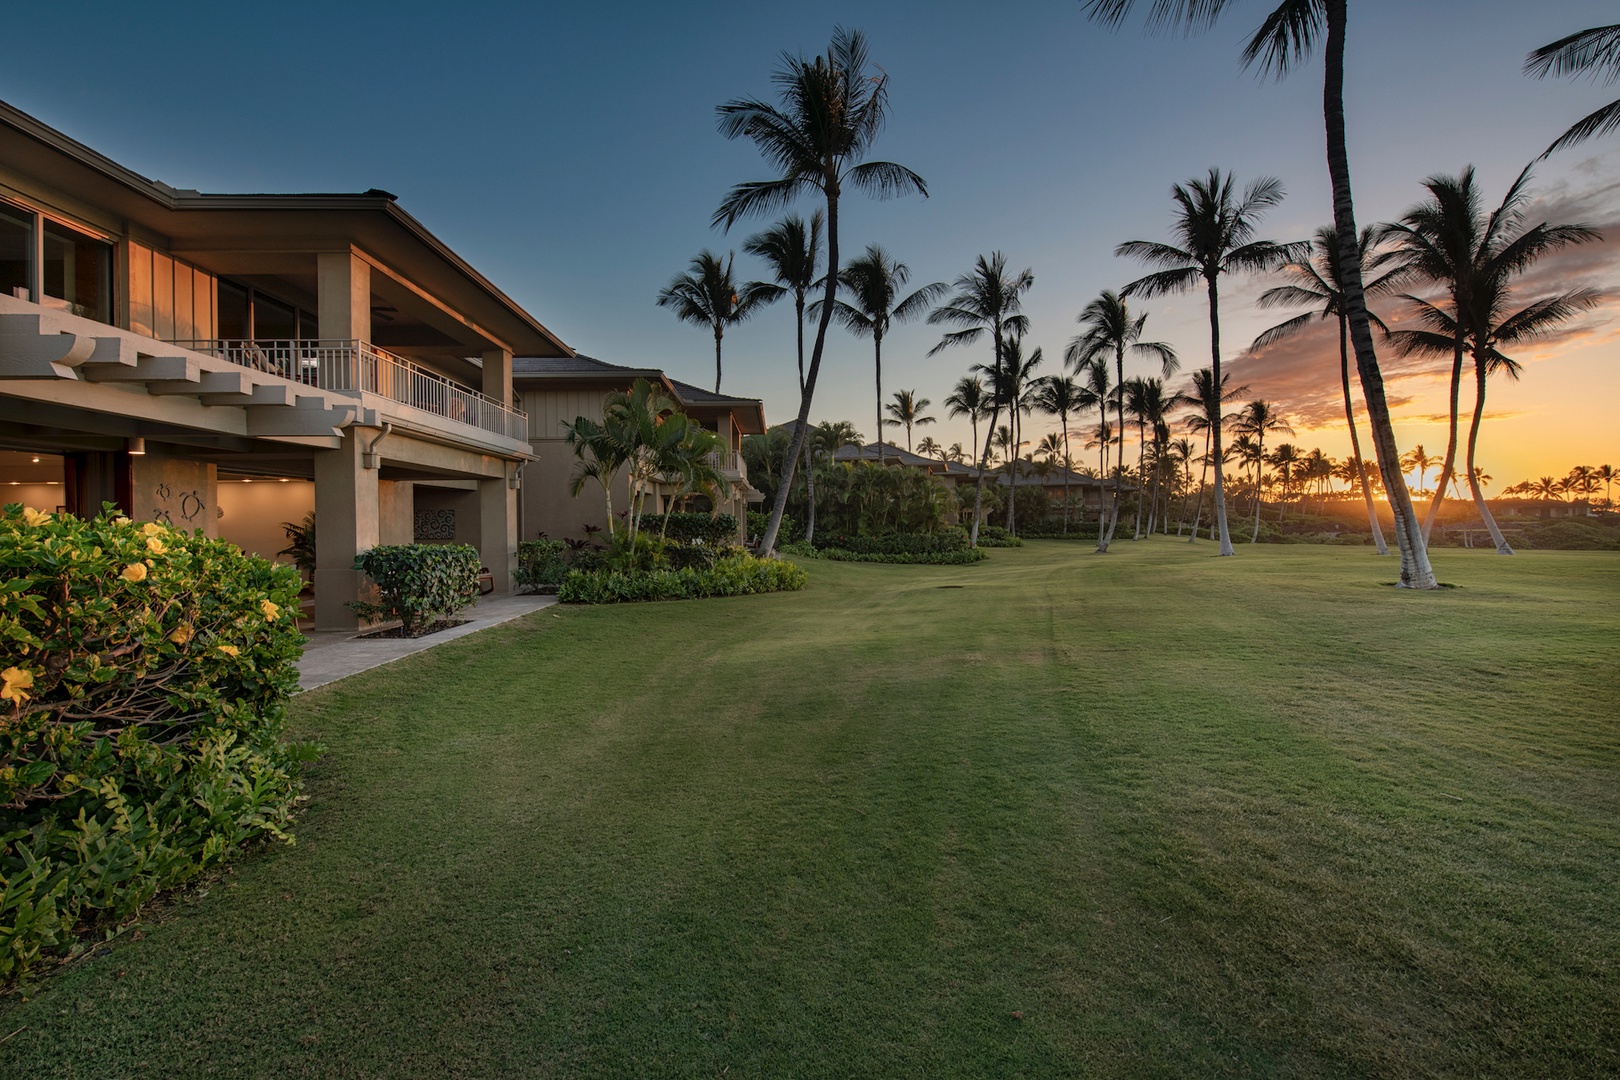 Kailua Kona Vacation Rentals, 3BD Golf Villa (3101) at Four Seasons Resort at Hualalai - The famous "front row" of the golf villas at sunset, with nothing but sprawling green between you and the ocean.